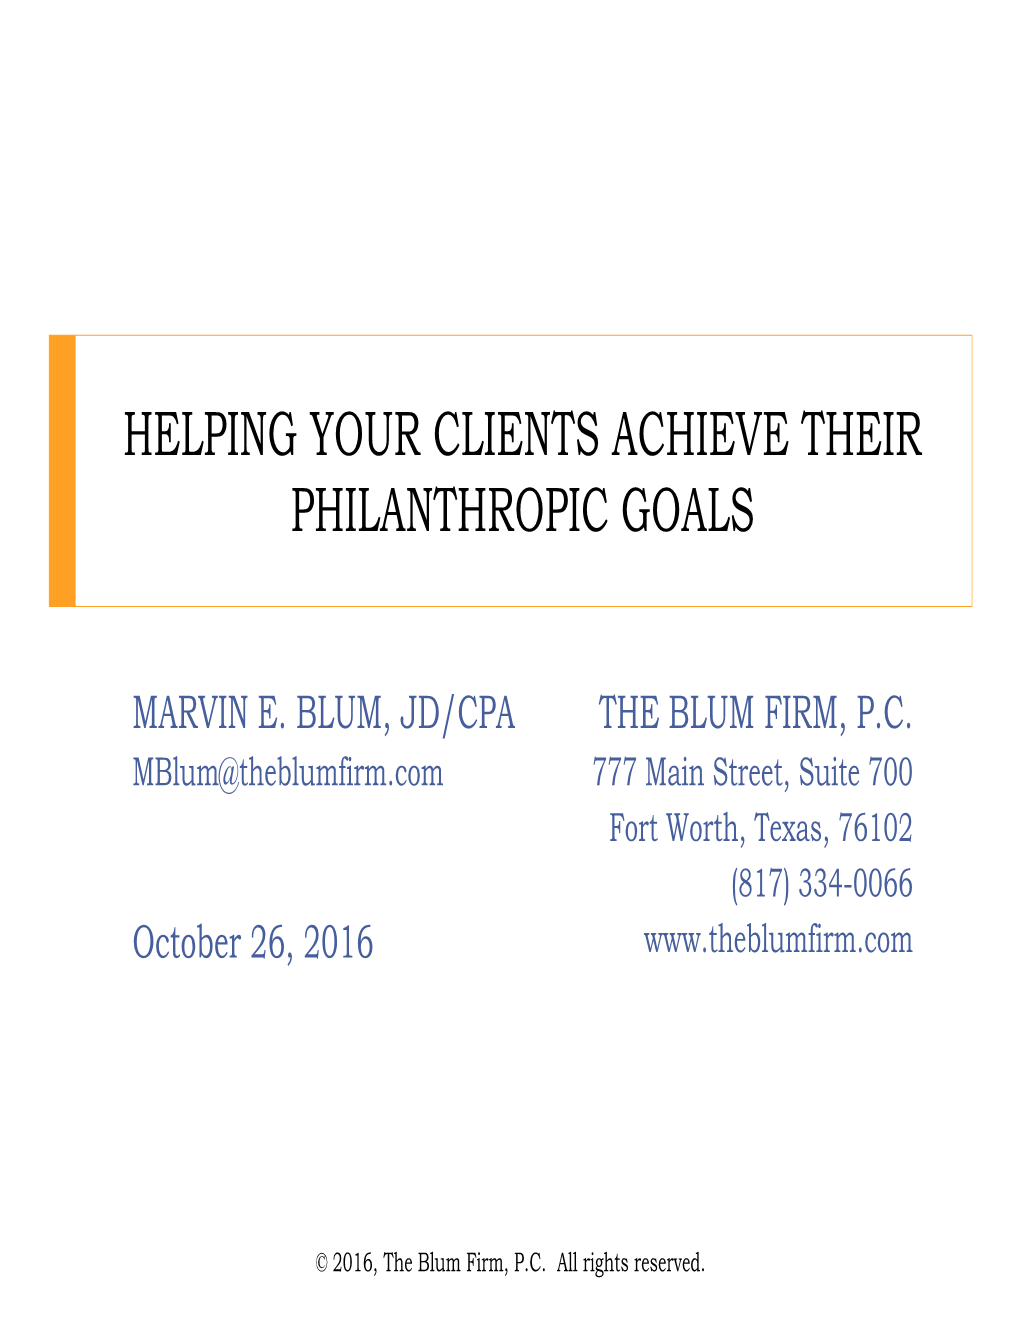 Helping Your Clients Achieve Their Philanthropic Goals